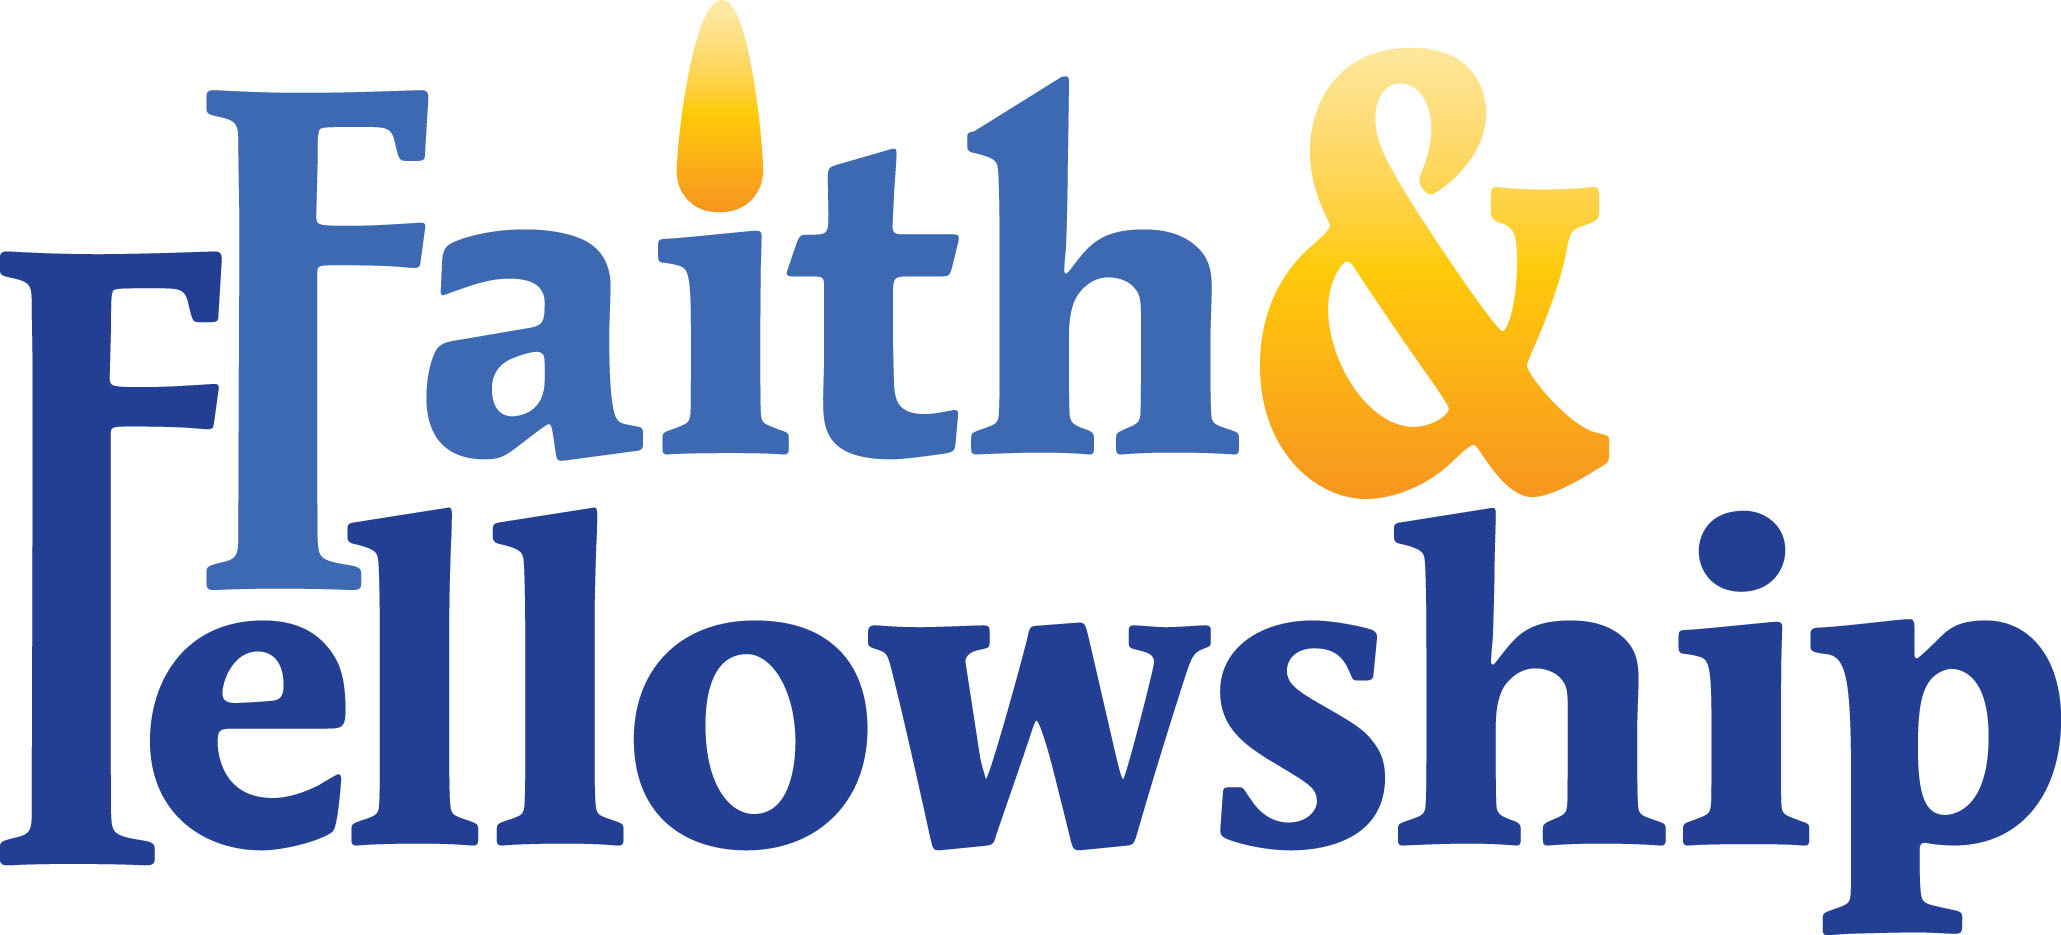 Fellowship clipart #7, Download drawings